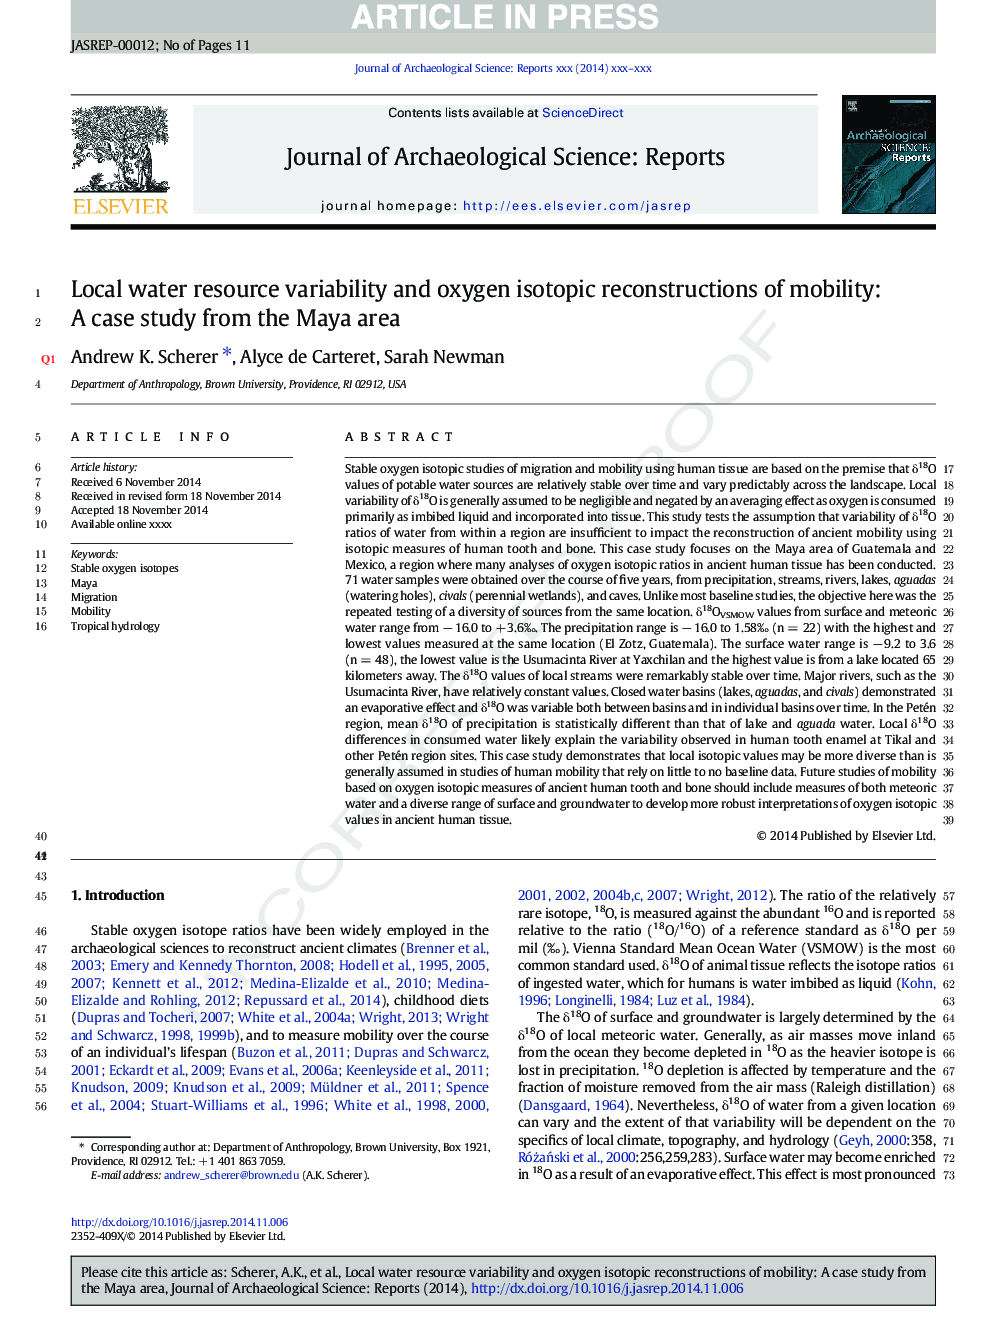 Local water resource variability and oxygen isotopic reconstructions of mobility: A case study from the Maya area